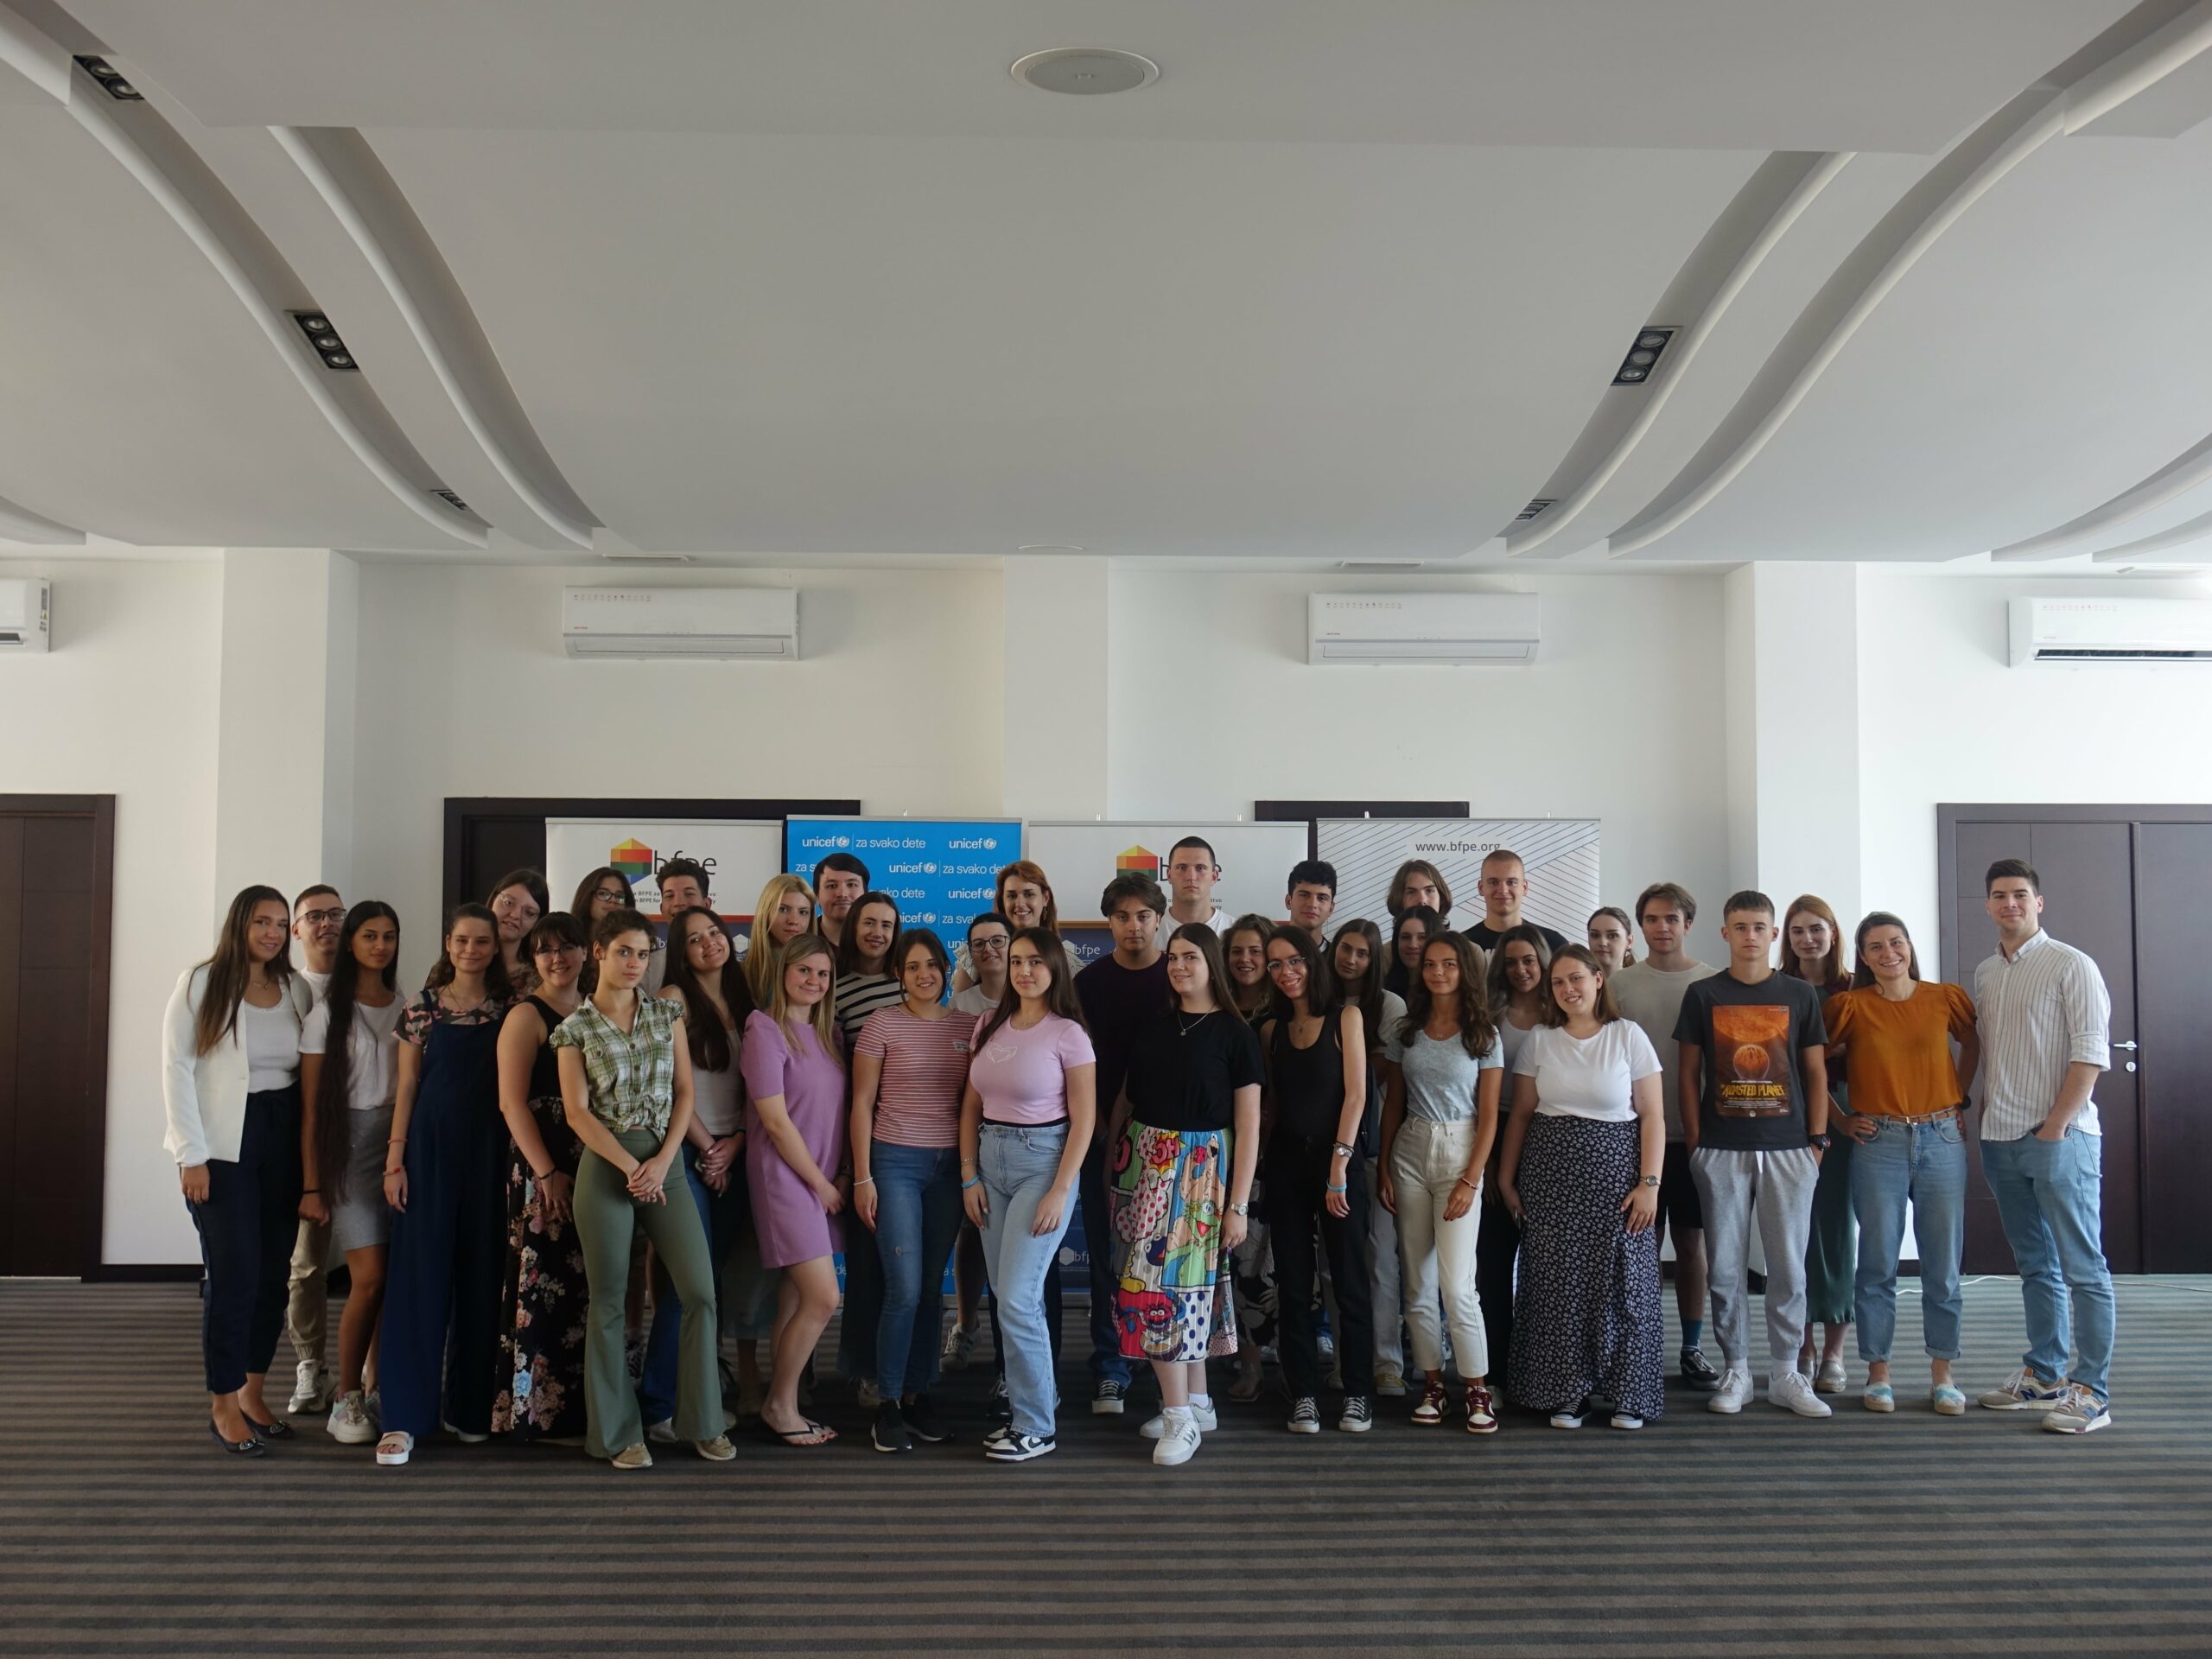 “Breathing for tomorrow ” – the training was held for young people on air quality and public advocacy